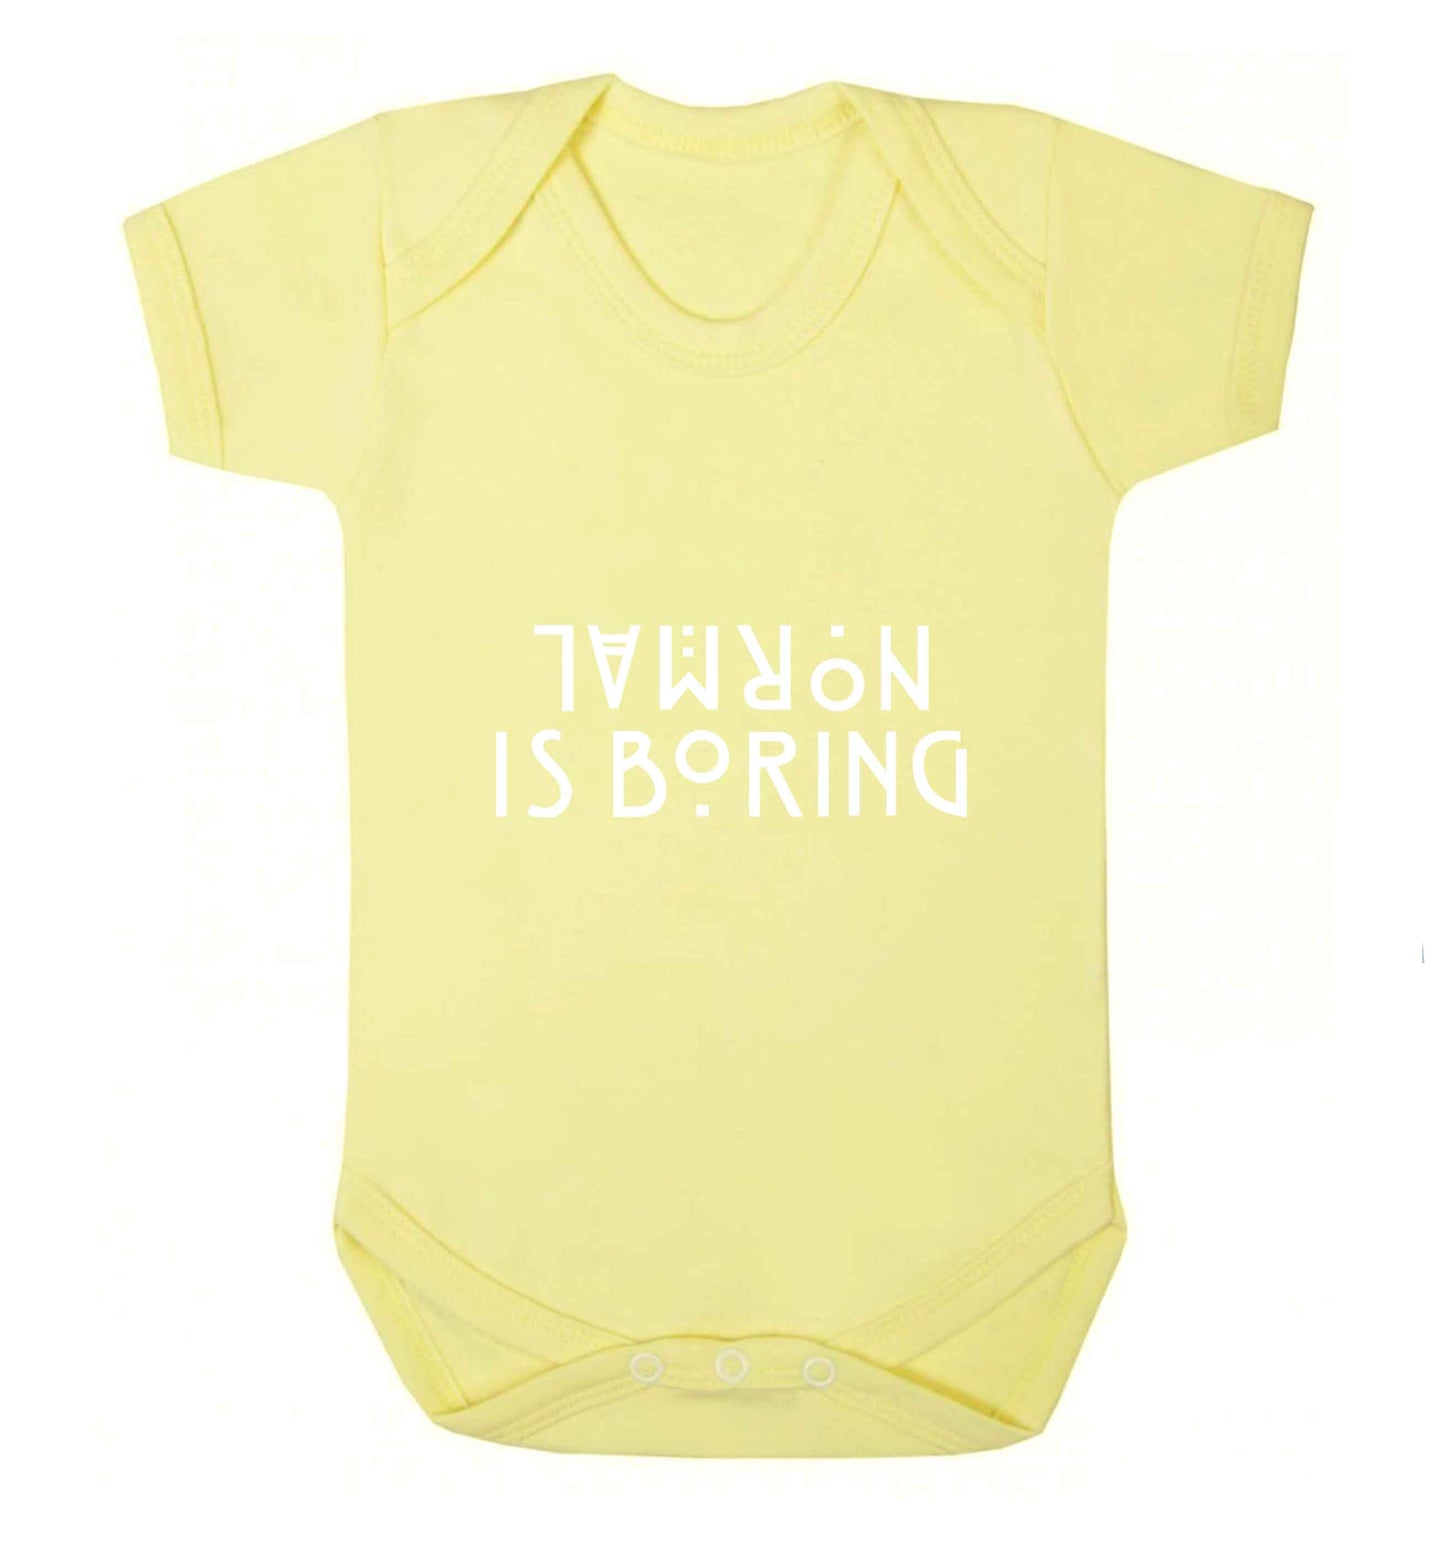 Normal is boring baby vest pale yellow 18-24 months